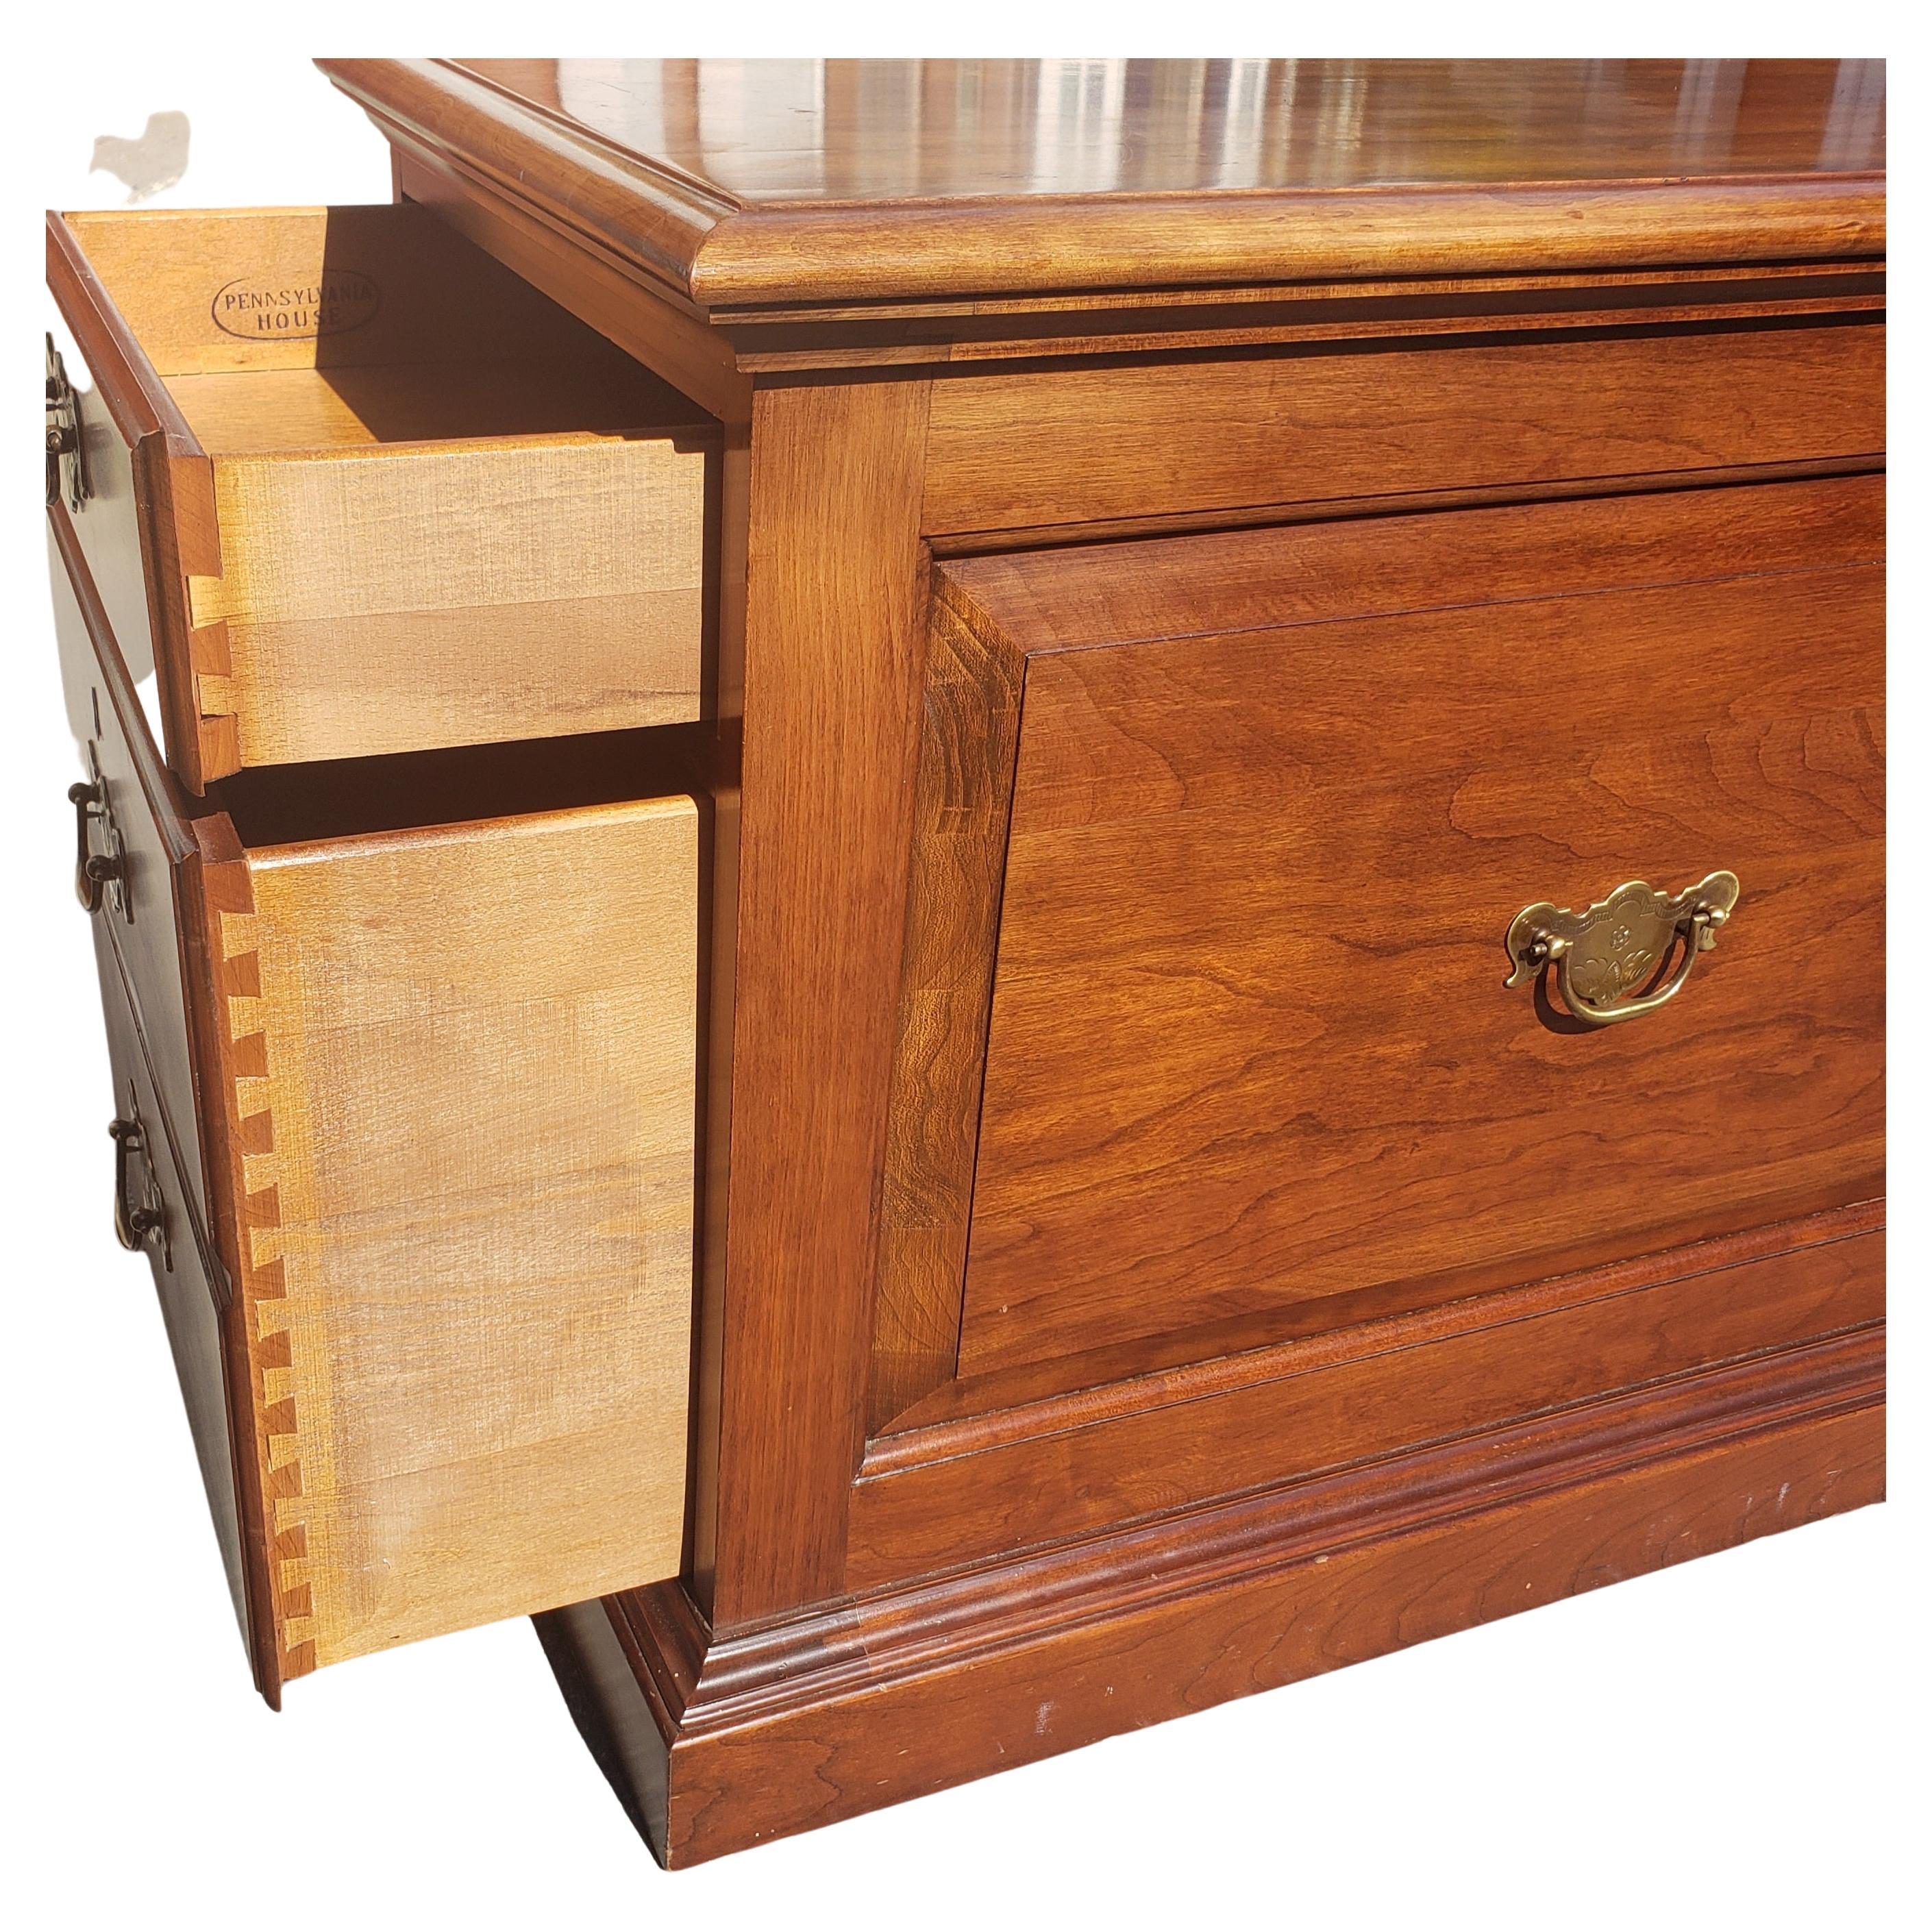 Pennsylvania House Executive Chippendale Solid Cherry Filing Cabinet, Pair 1970s For Sale 1